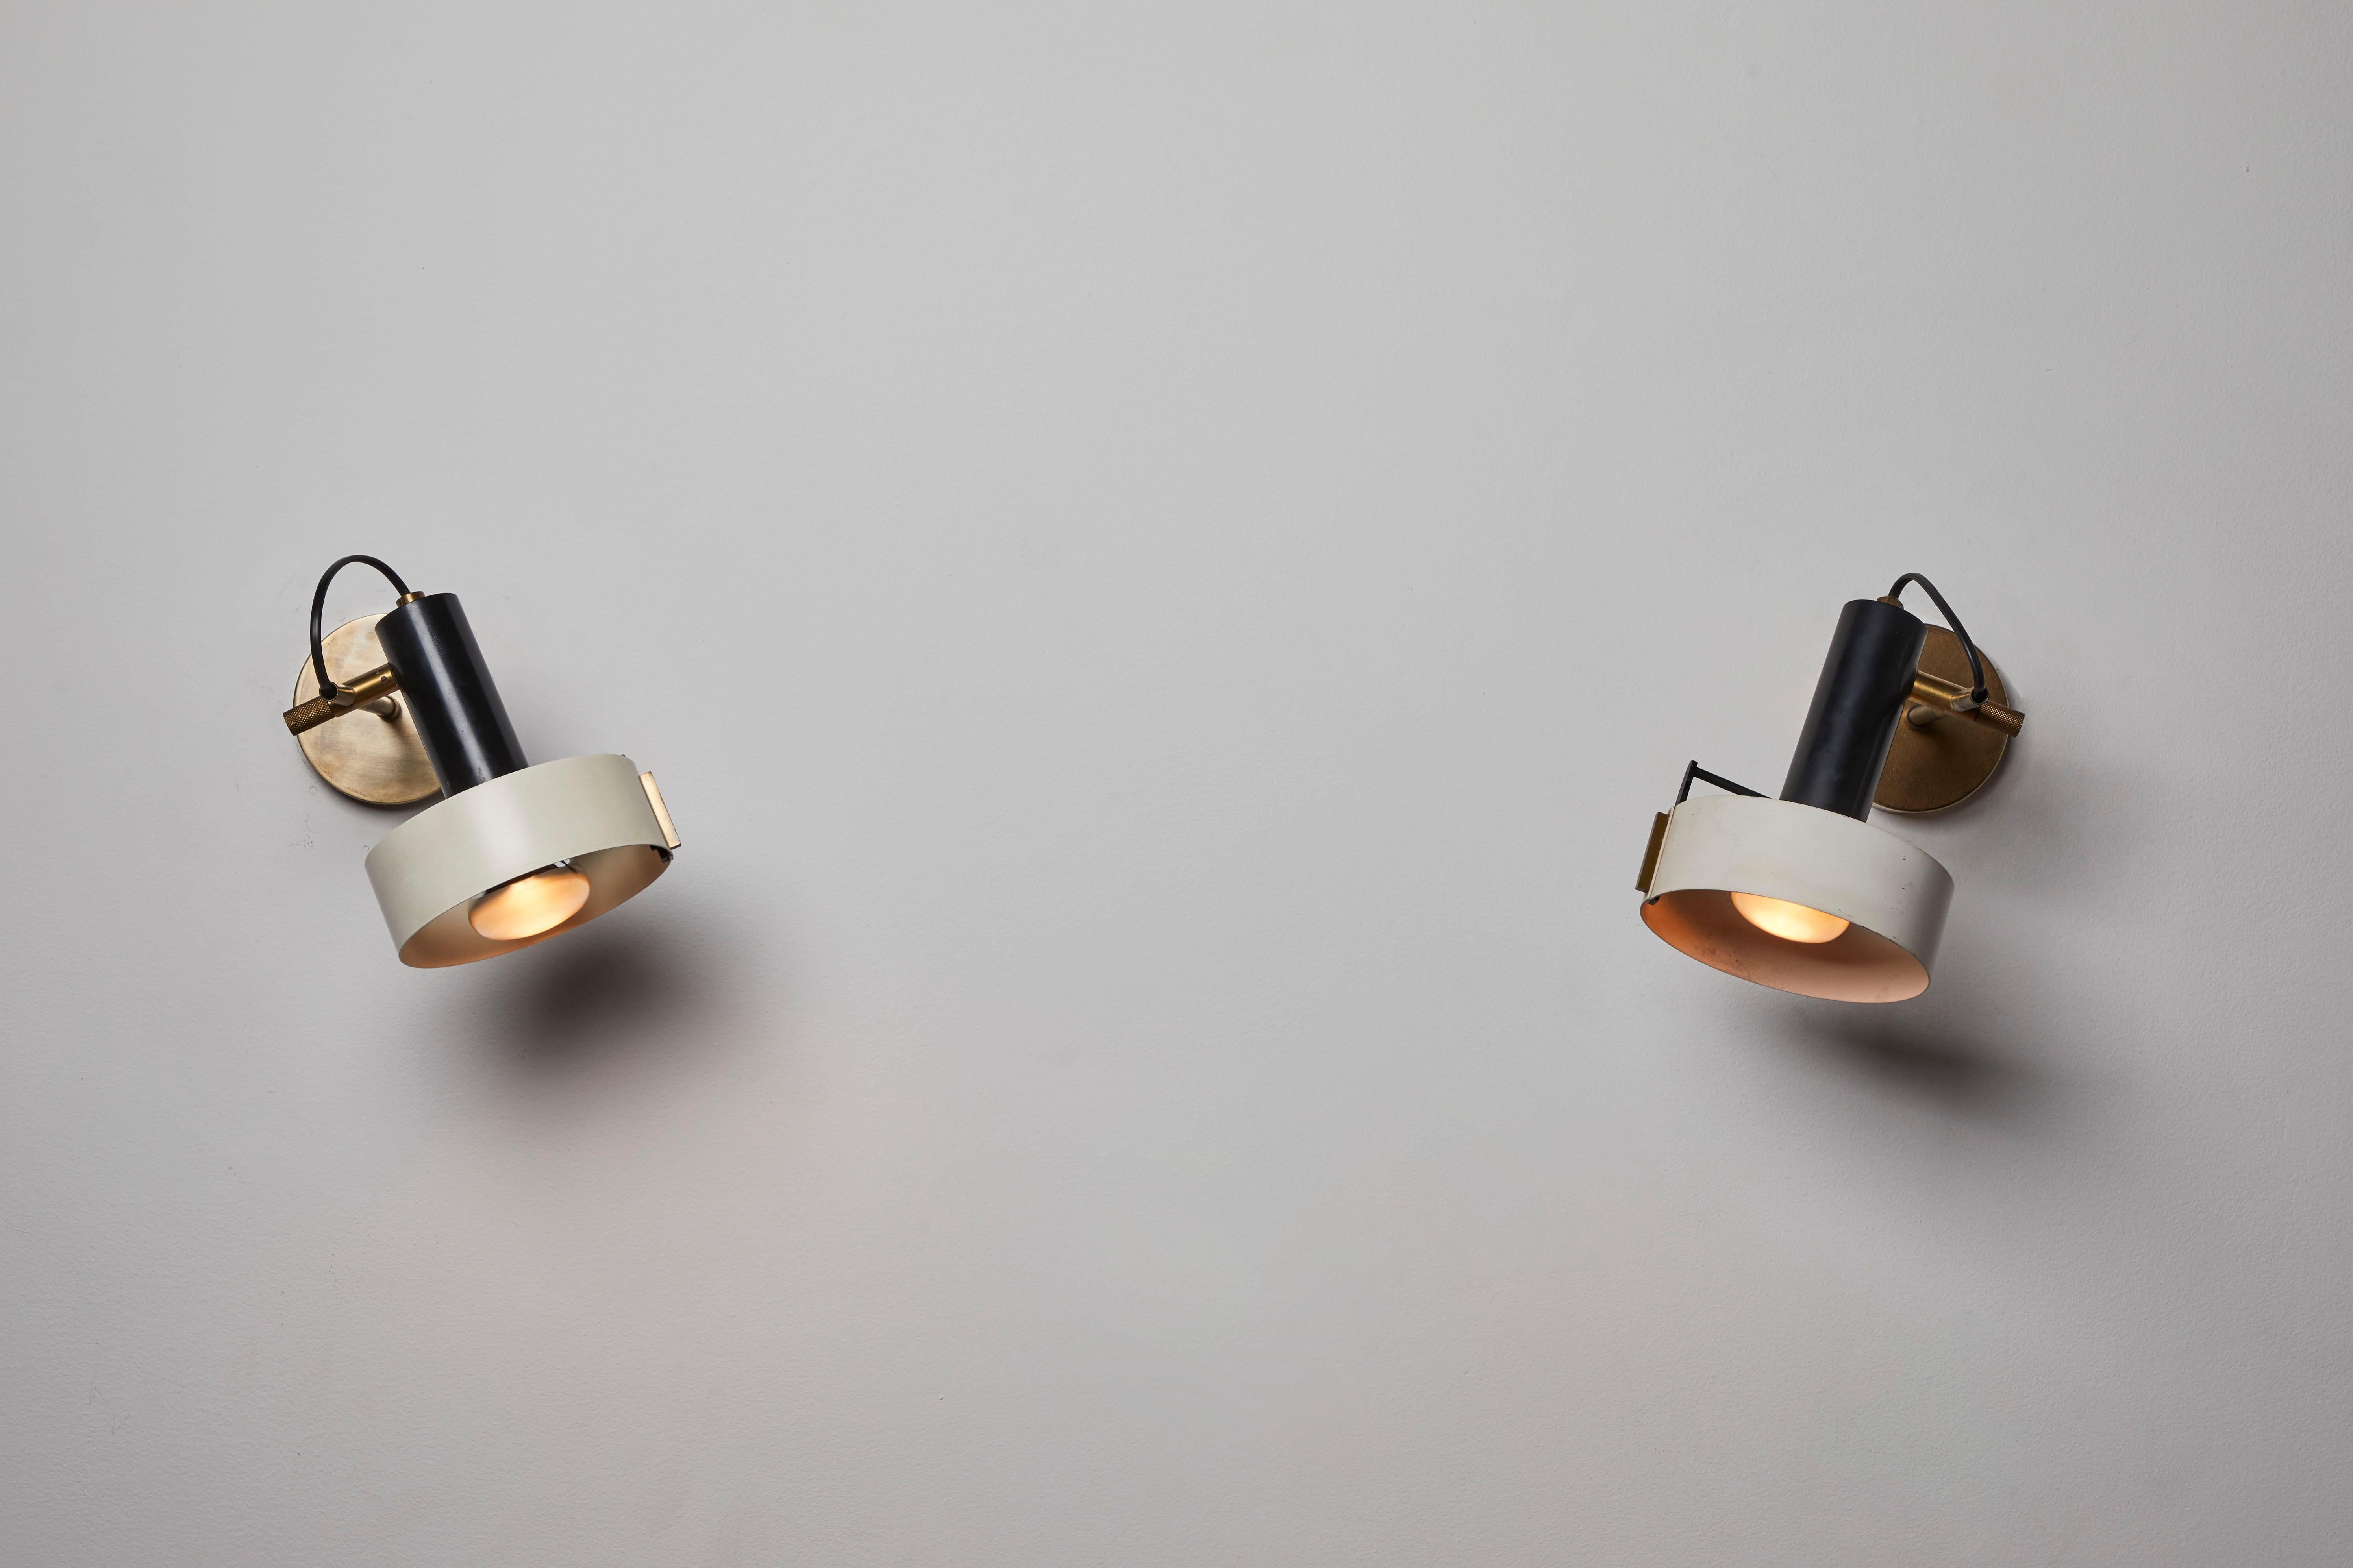 Pair of unique sconces by Stilnovo. Manufactured in Italy, circa 1960s. Enameled metal, brass. Rewired for U.S. junction boxes. Sconces adjust to various positions. Custom brass backplates. Metal rod that connects the ring shade to the base differs